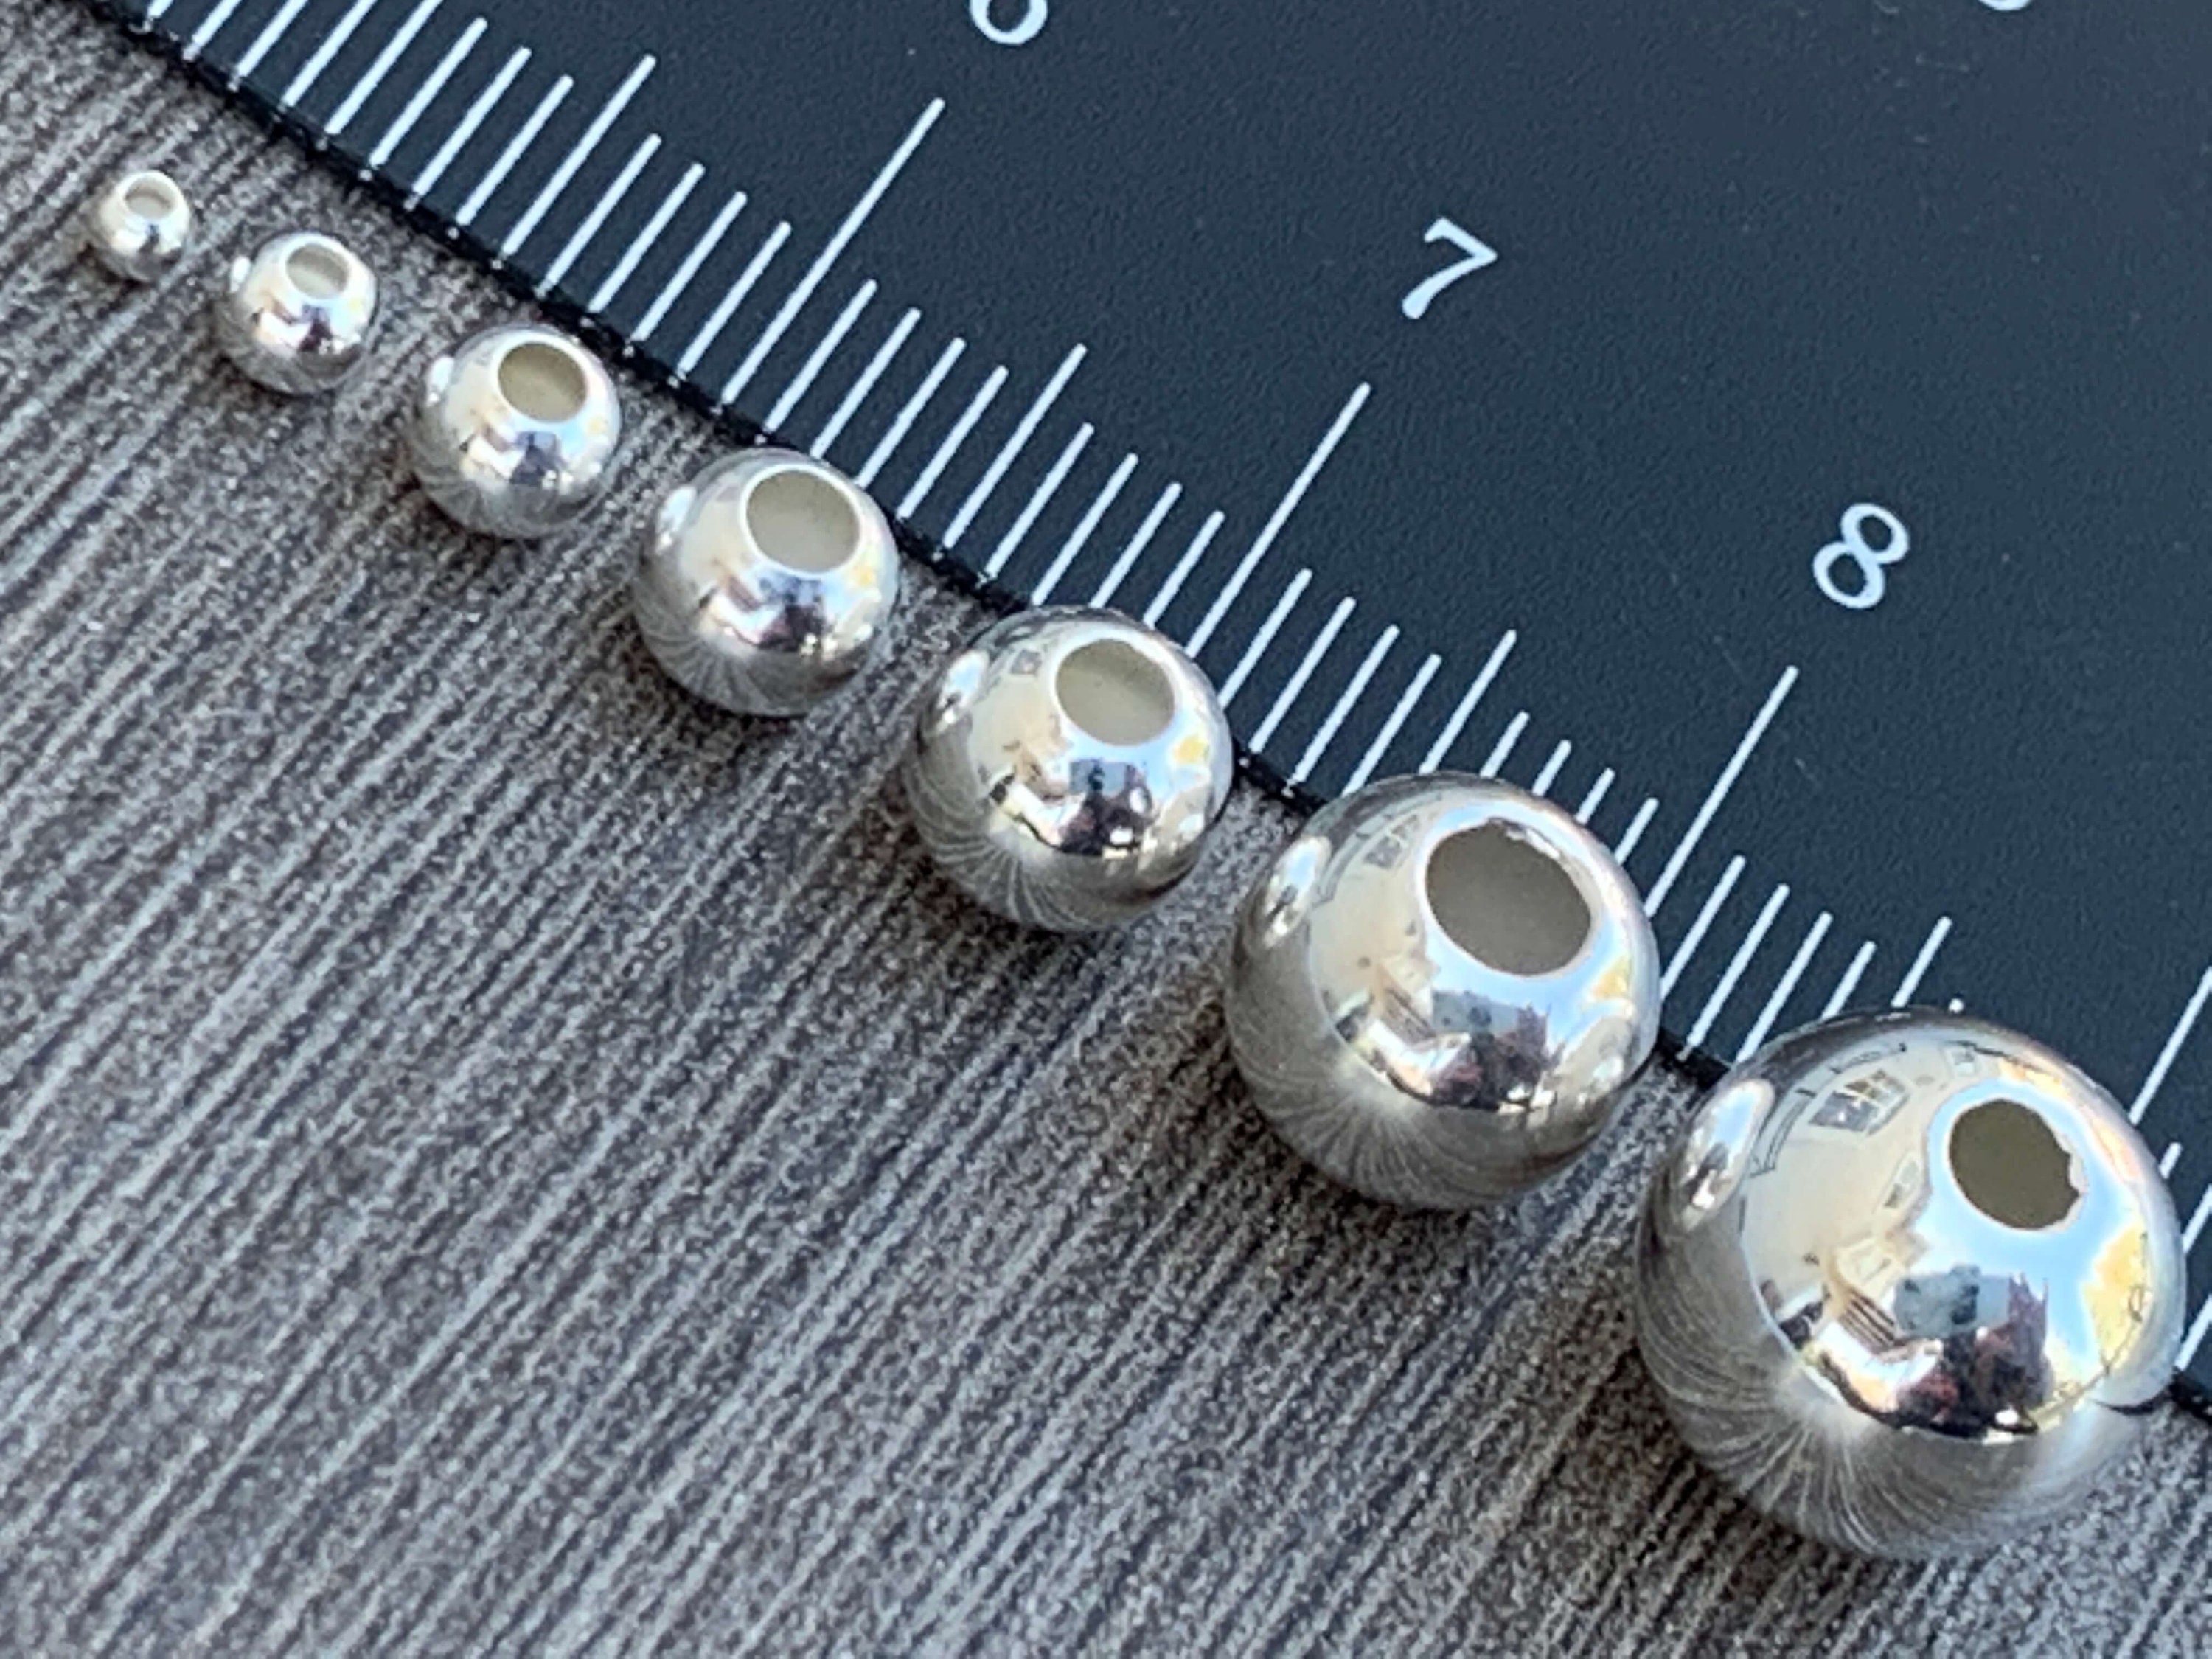 300pc, 2mm Beads, 2mm Sterling Silver Beads, Polished Plain Beads, Round  Seamless Beads, Seed Beads, .925 Silver spacers, Tiny Baby Balls